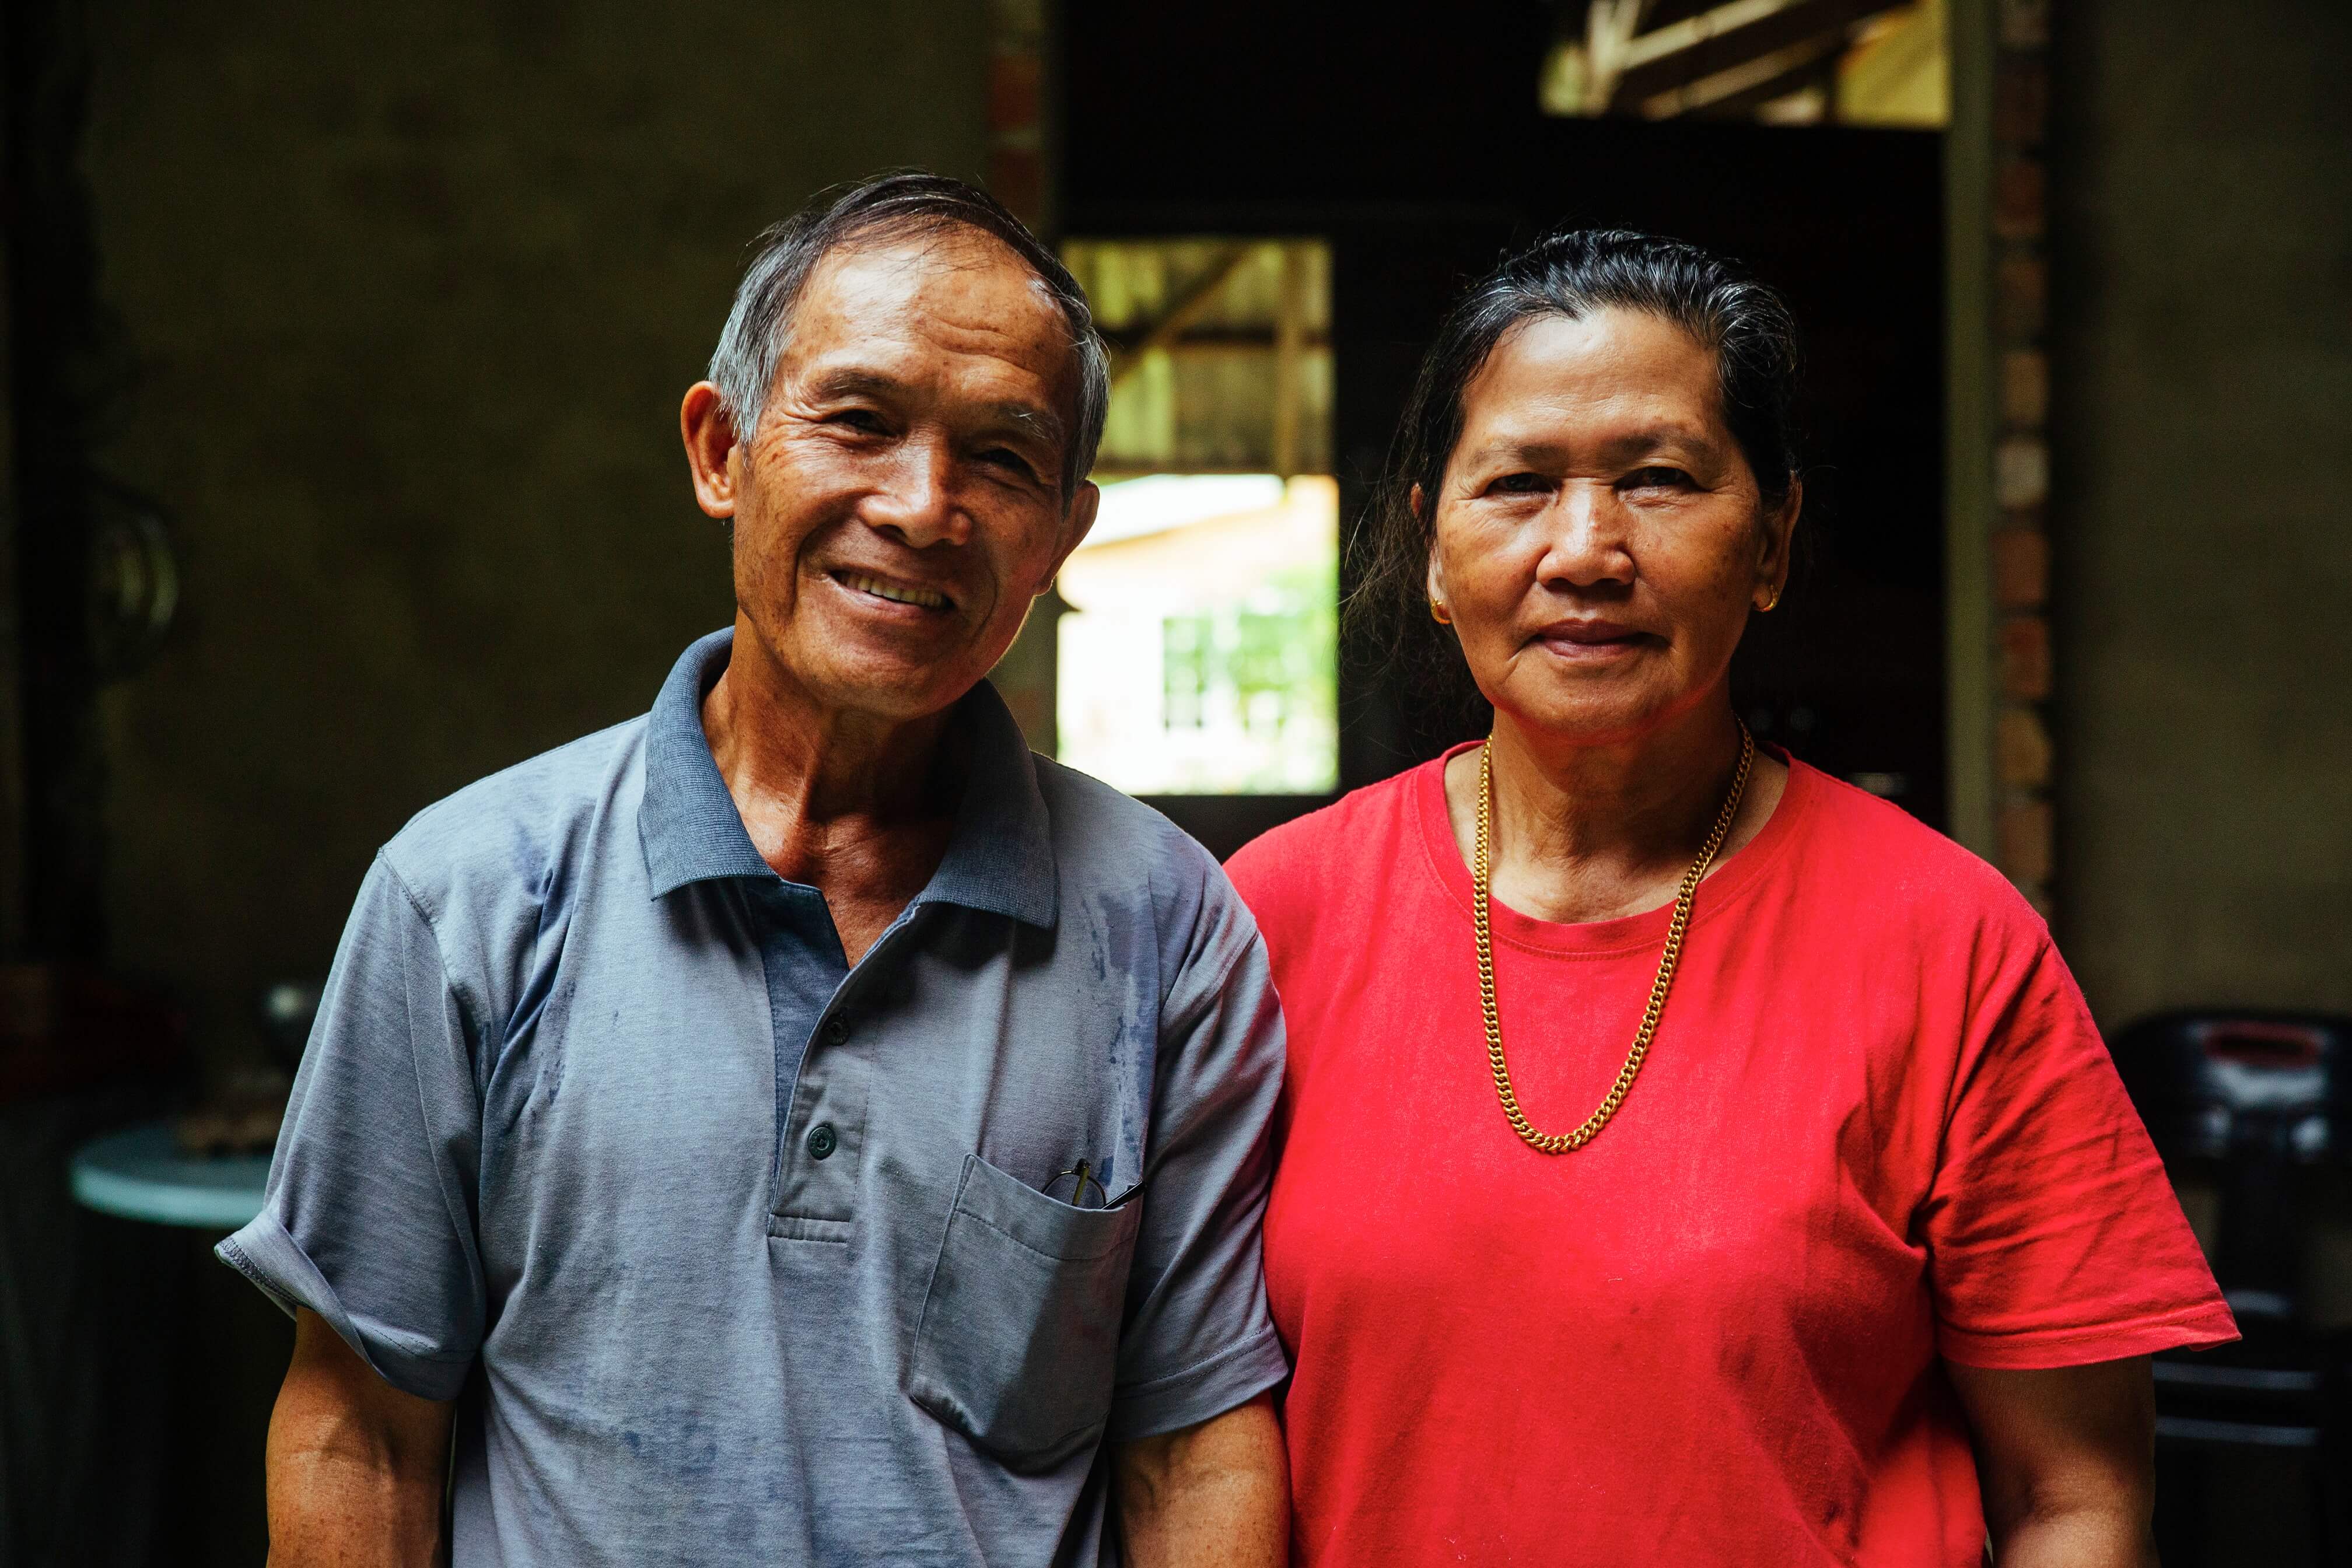 The chance to connect with Lun Bawang families — like Uncle Buas and Aunty Mina — makes the experience unlike any other. Photo by Teoh Eng Hooi